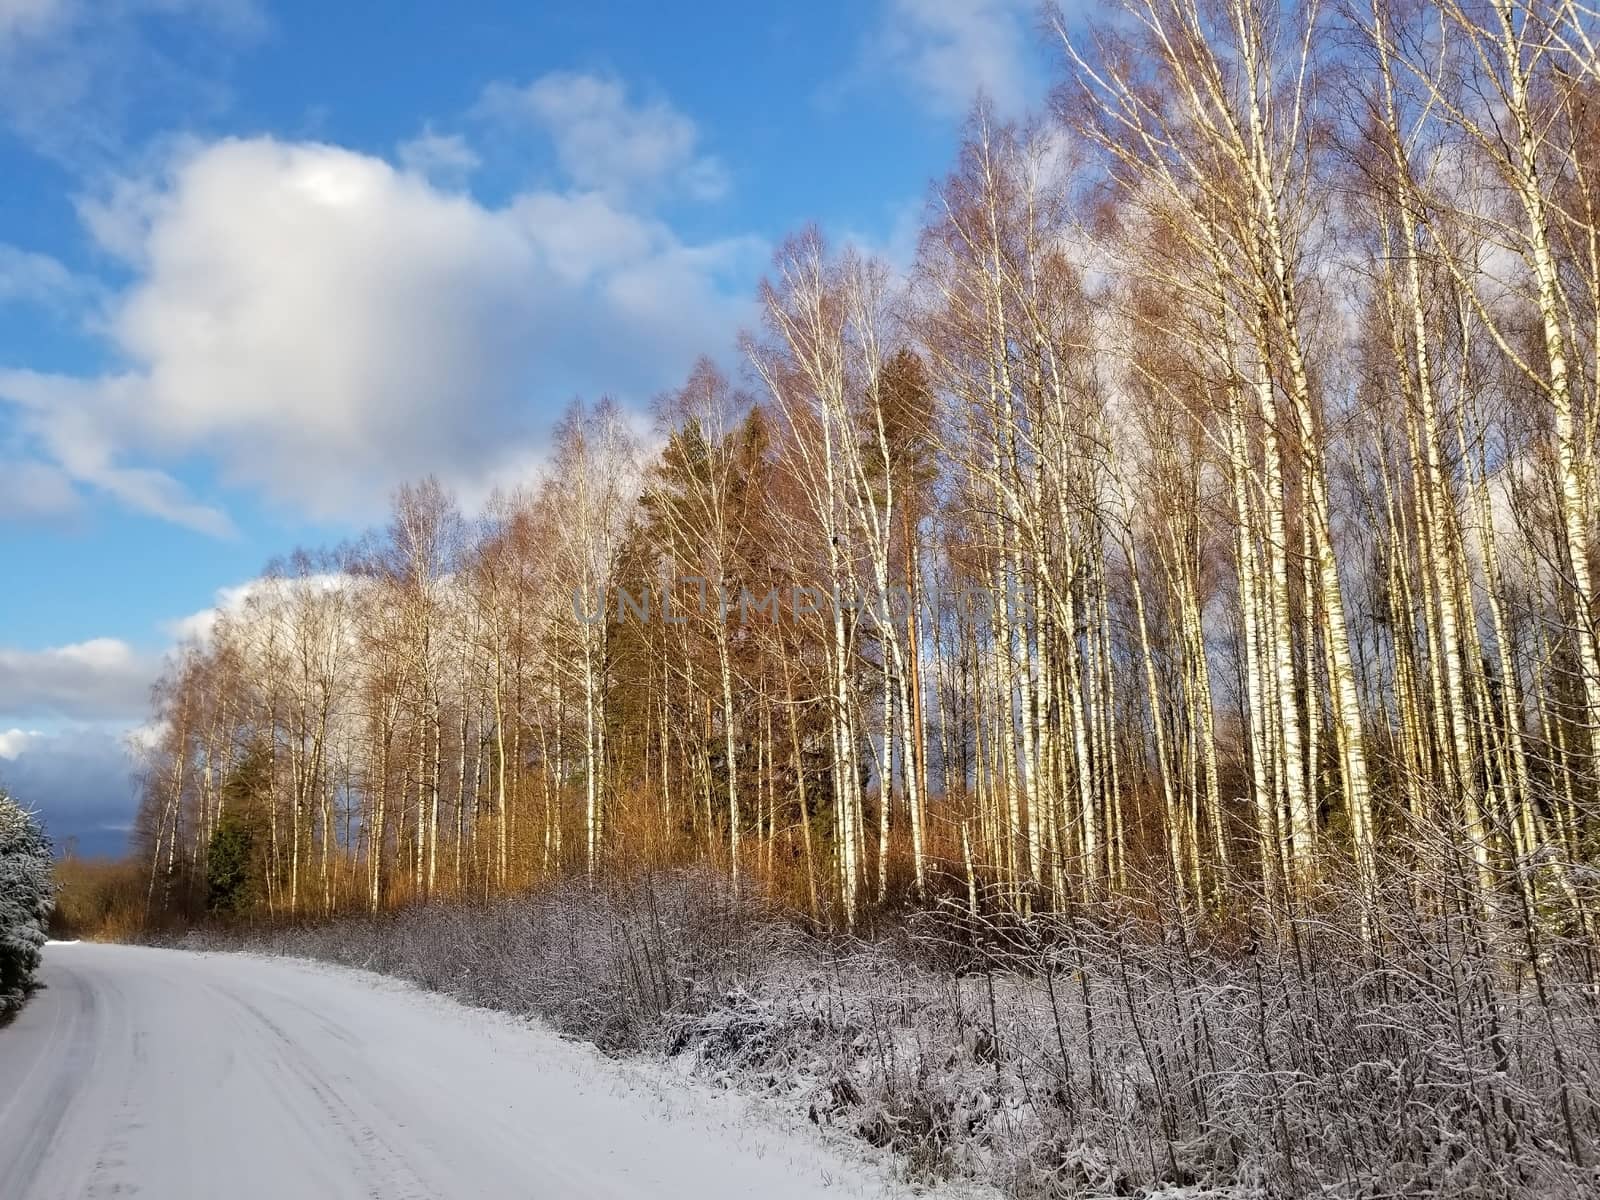 View of a road covered with snow and a winter birch forest against a blue sky by zakob337